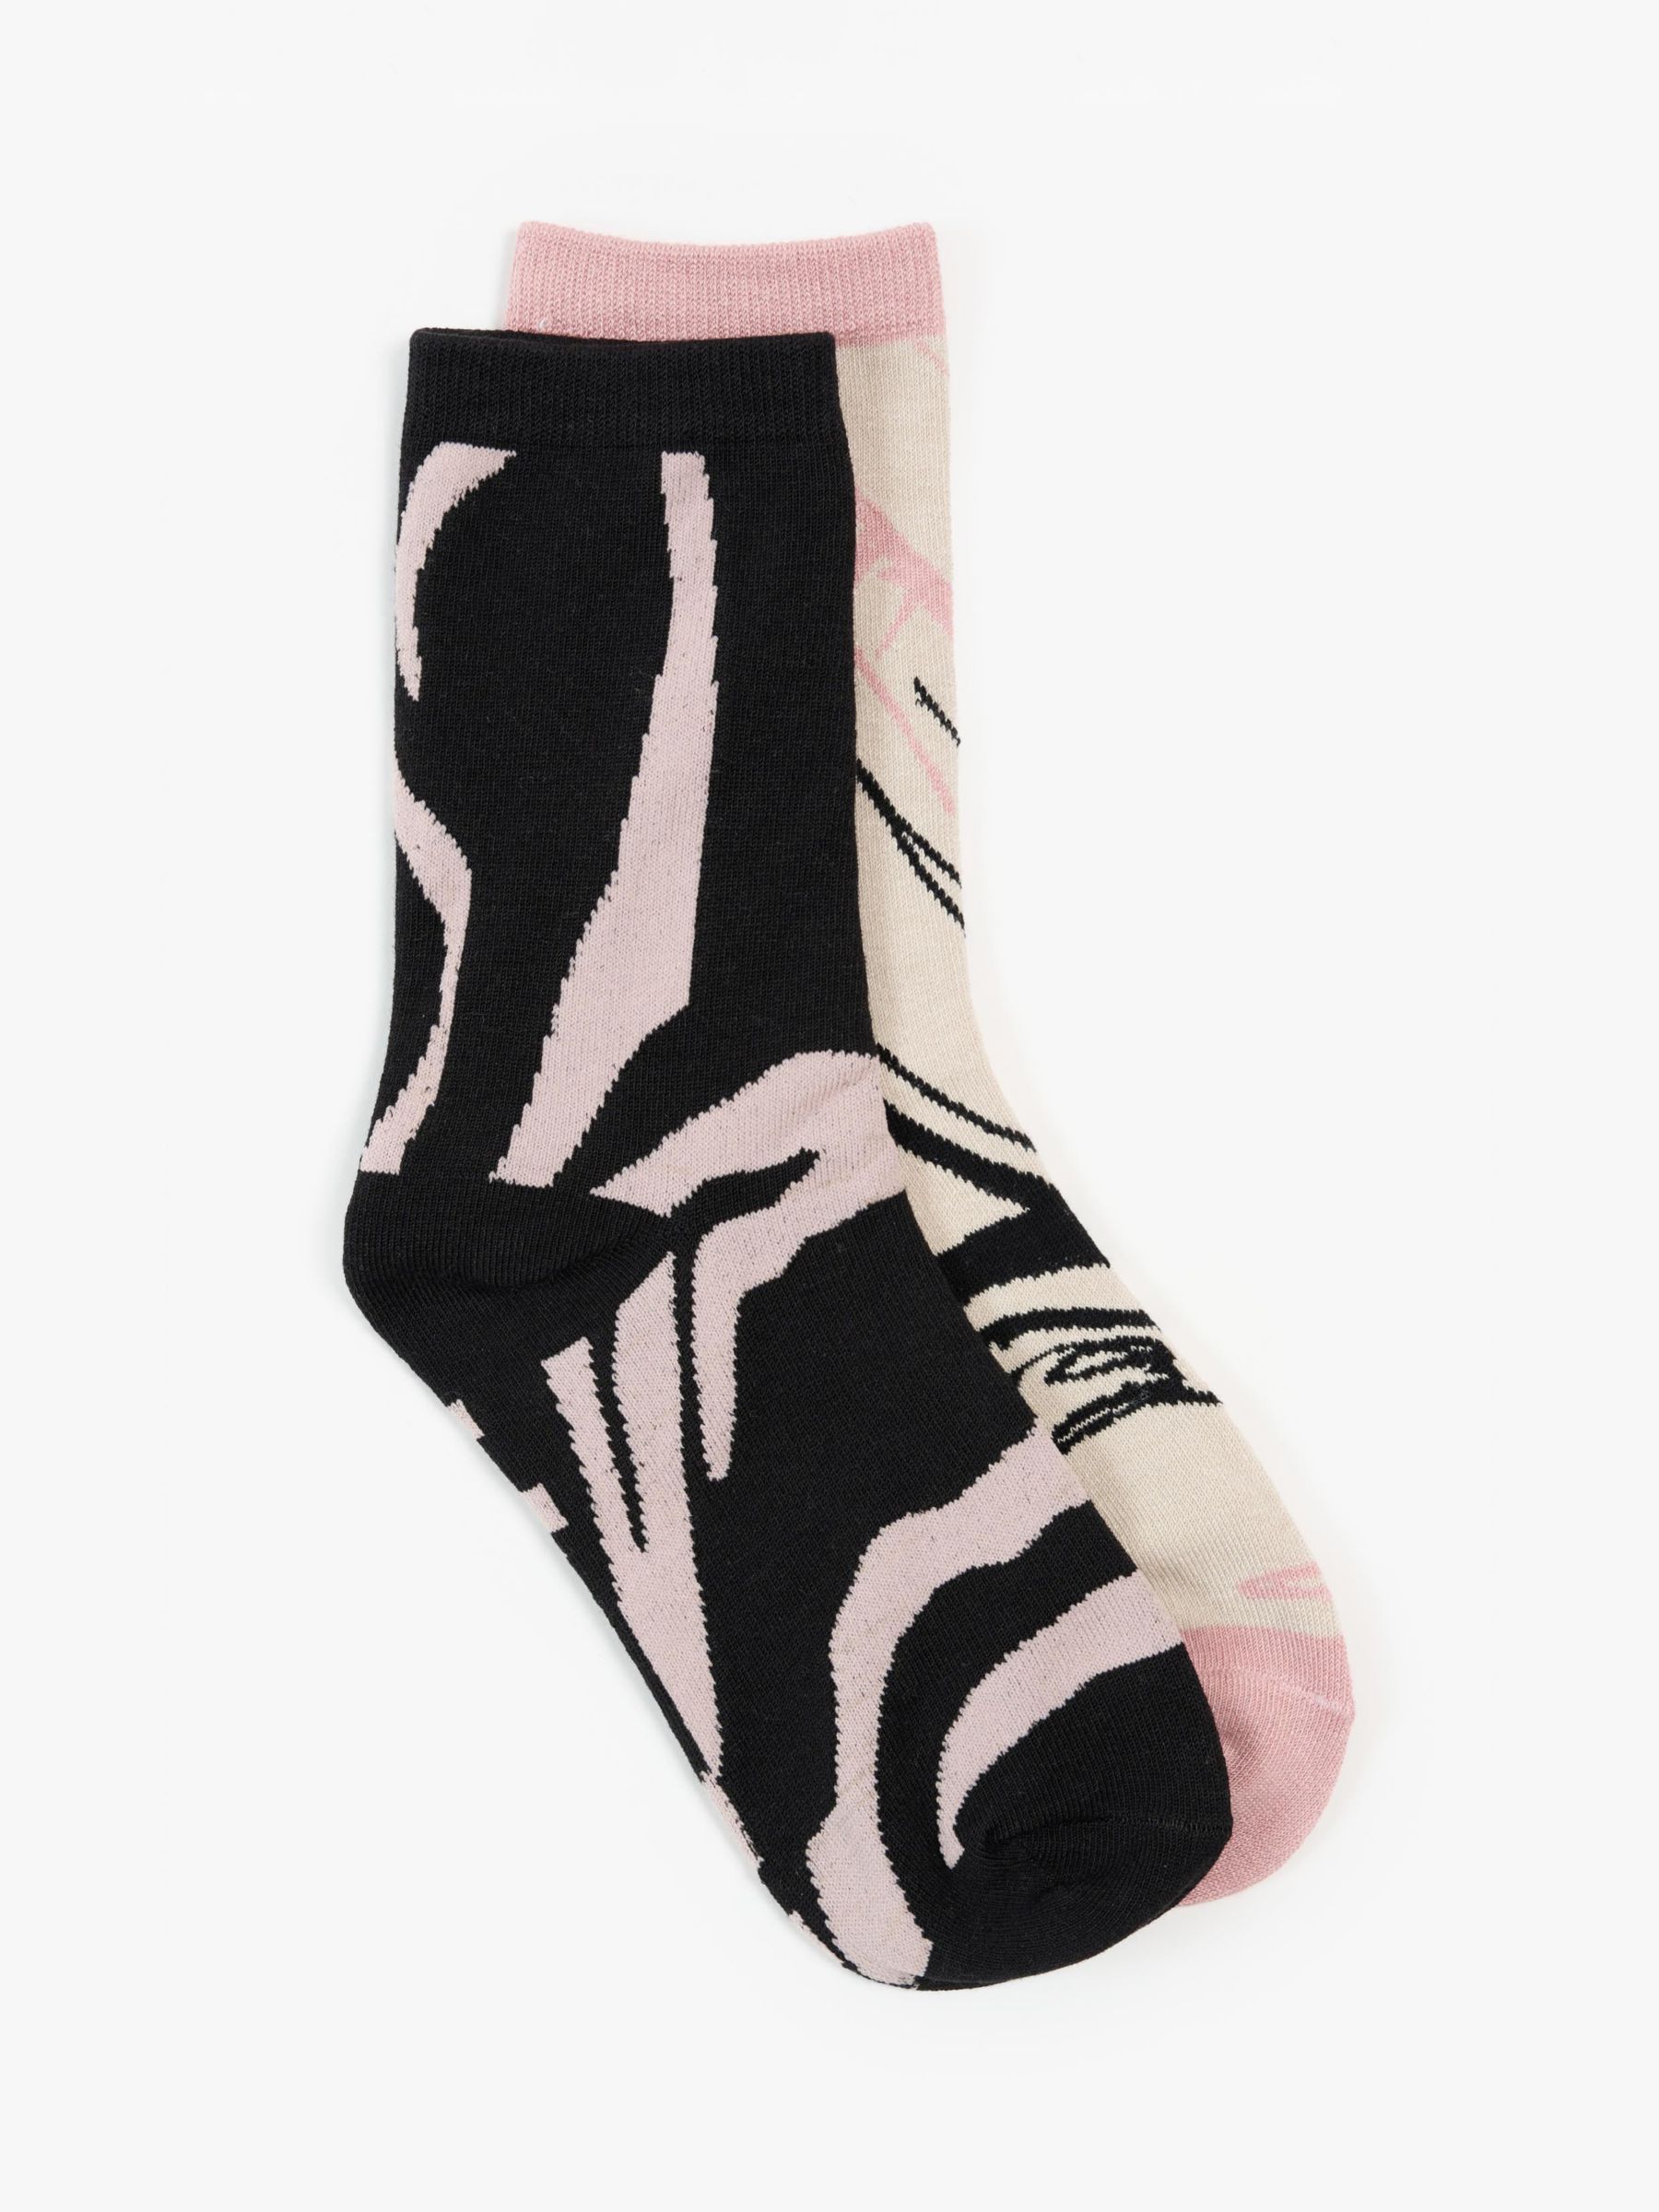 Buy Tutti & Co Wild & Muse Patterned Ankle Socks, Pack of 2, Black/Multi Online at johnlewis.com